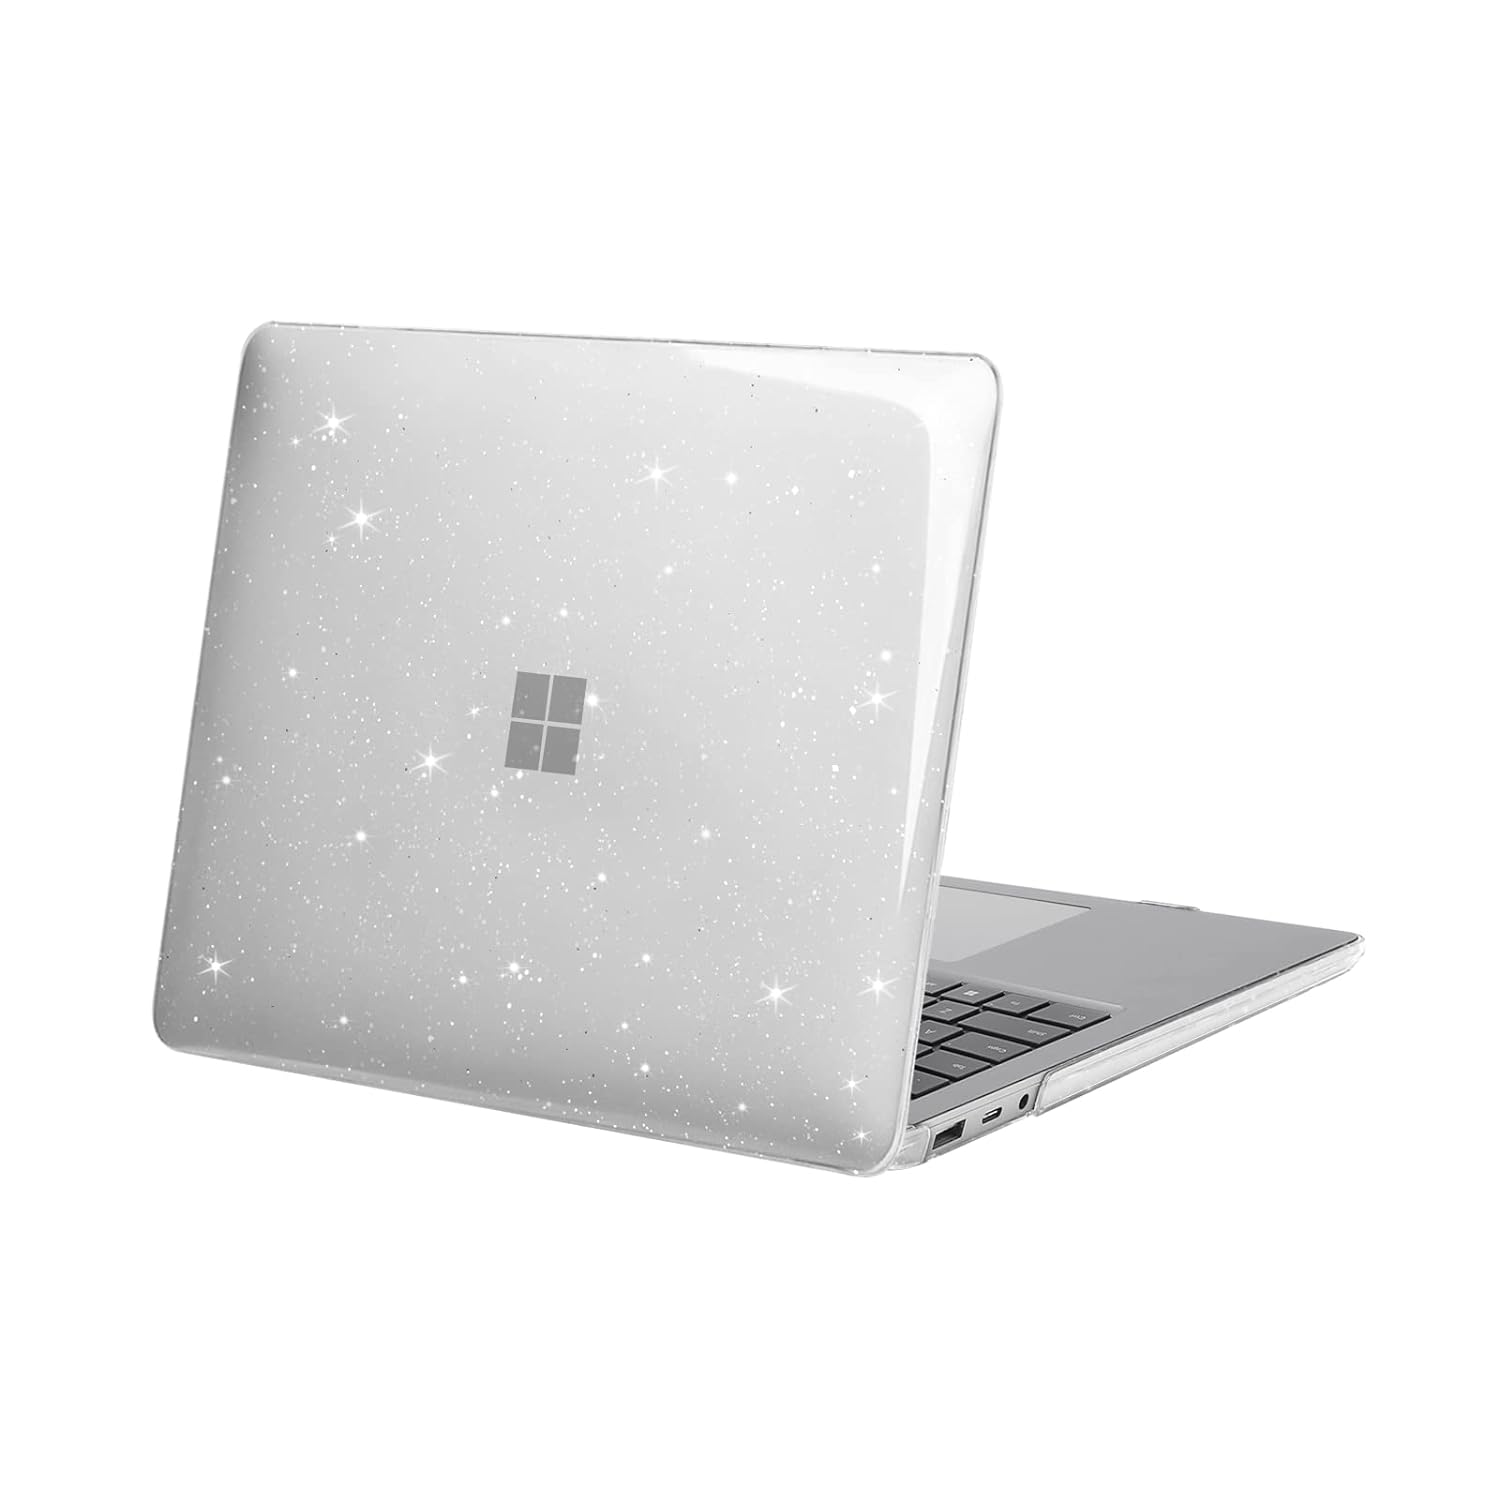 MOSISO Case Compatible with Surface Laptop 5/4/3 13.5 inch 2022 2021 2019 Release with Metal Keyboard (Models: 1951 & 1868), Protective Glitter Sparkly Plastic Hard Shell Case Cover, Transparent